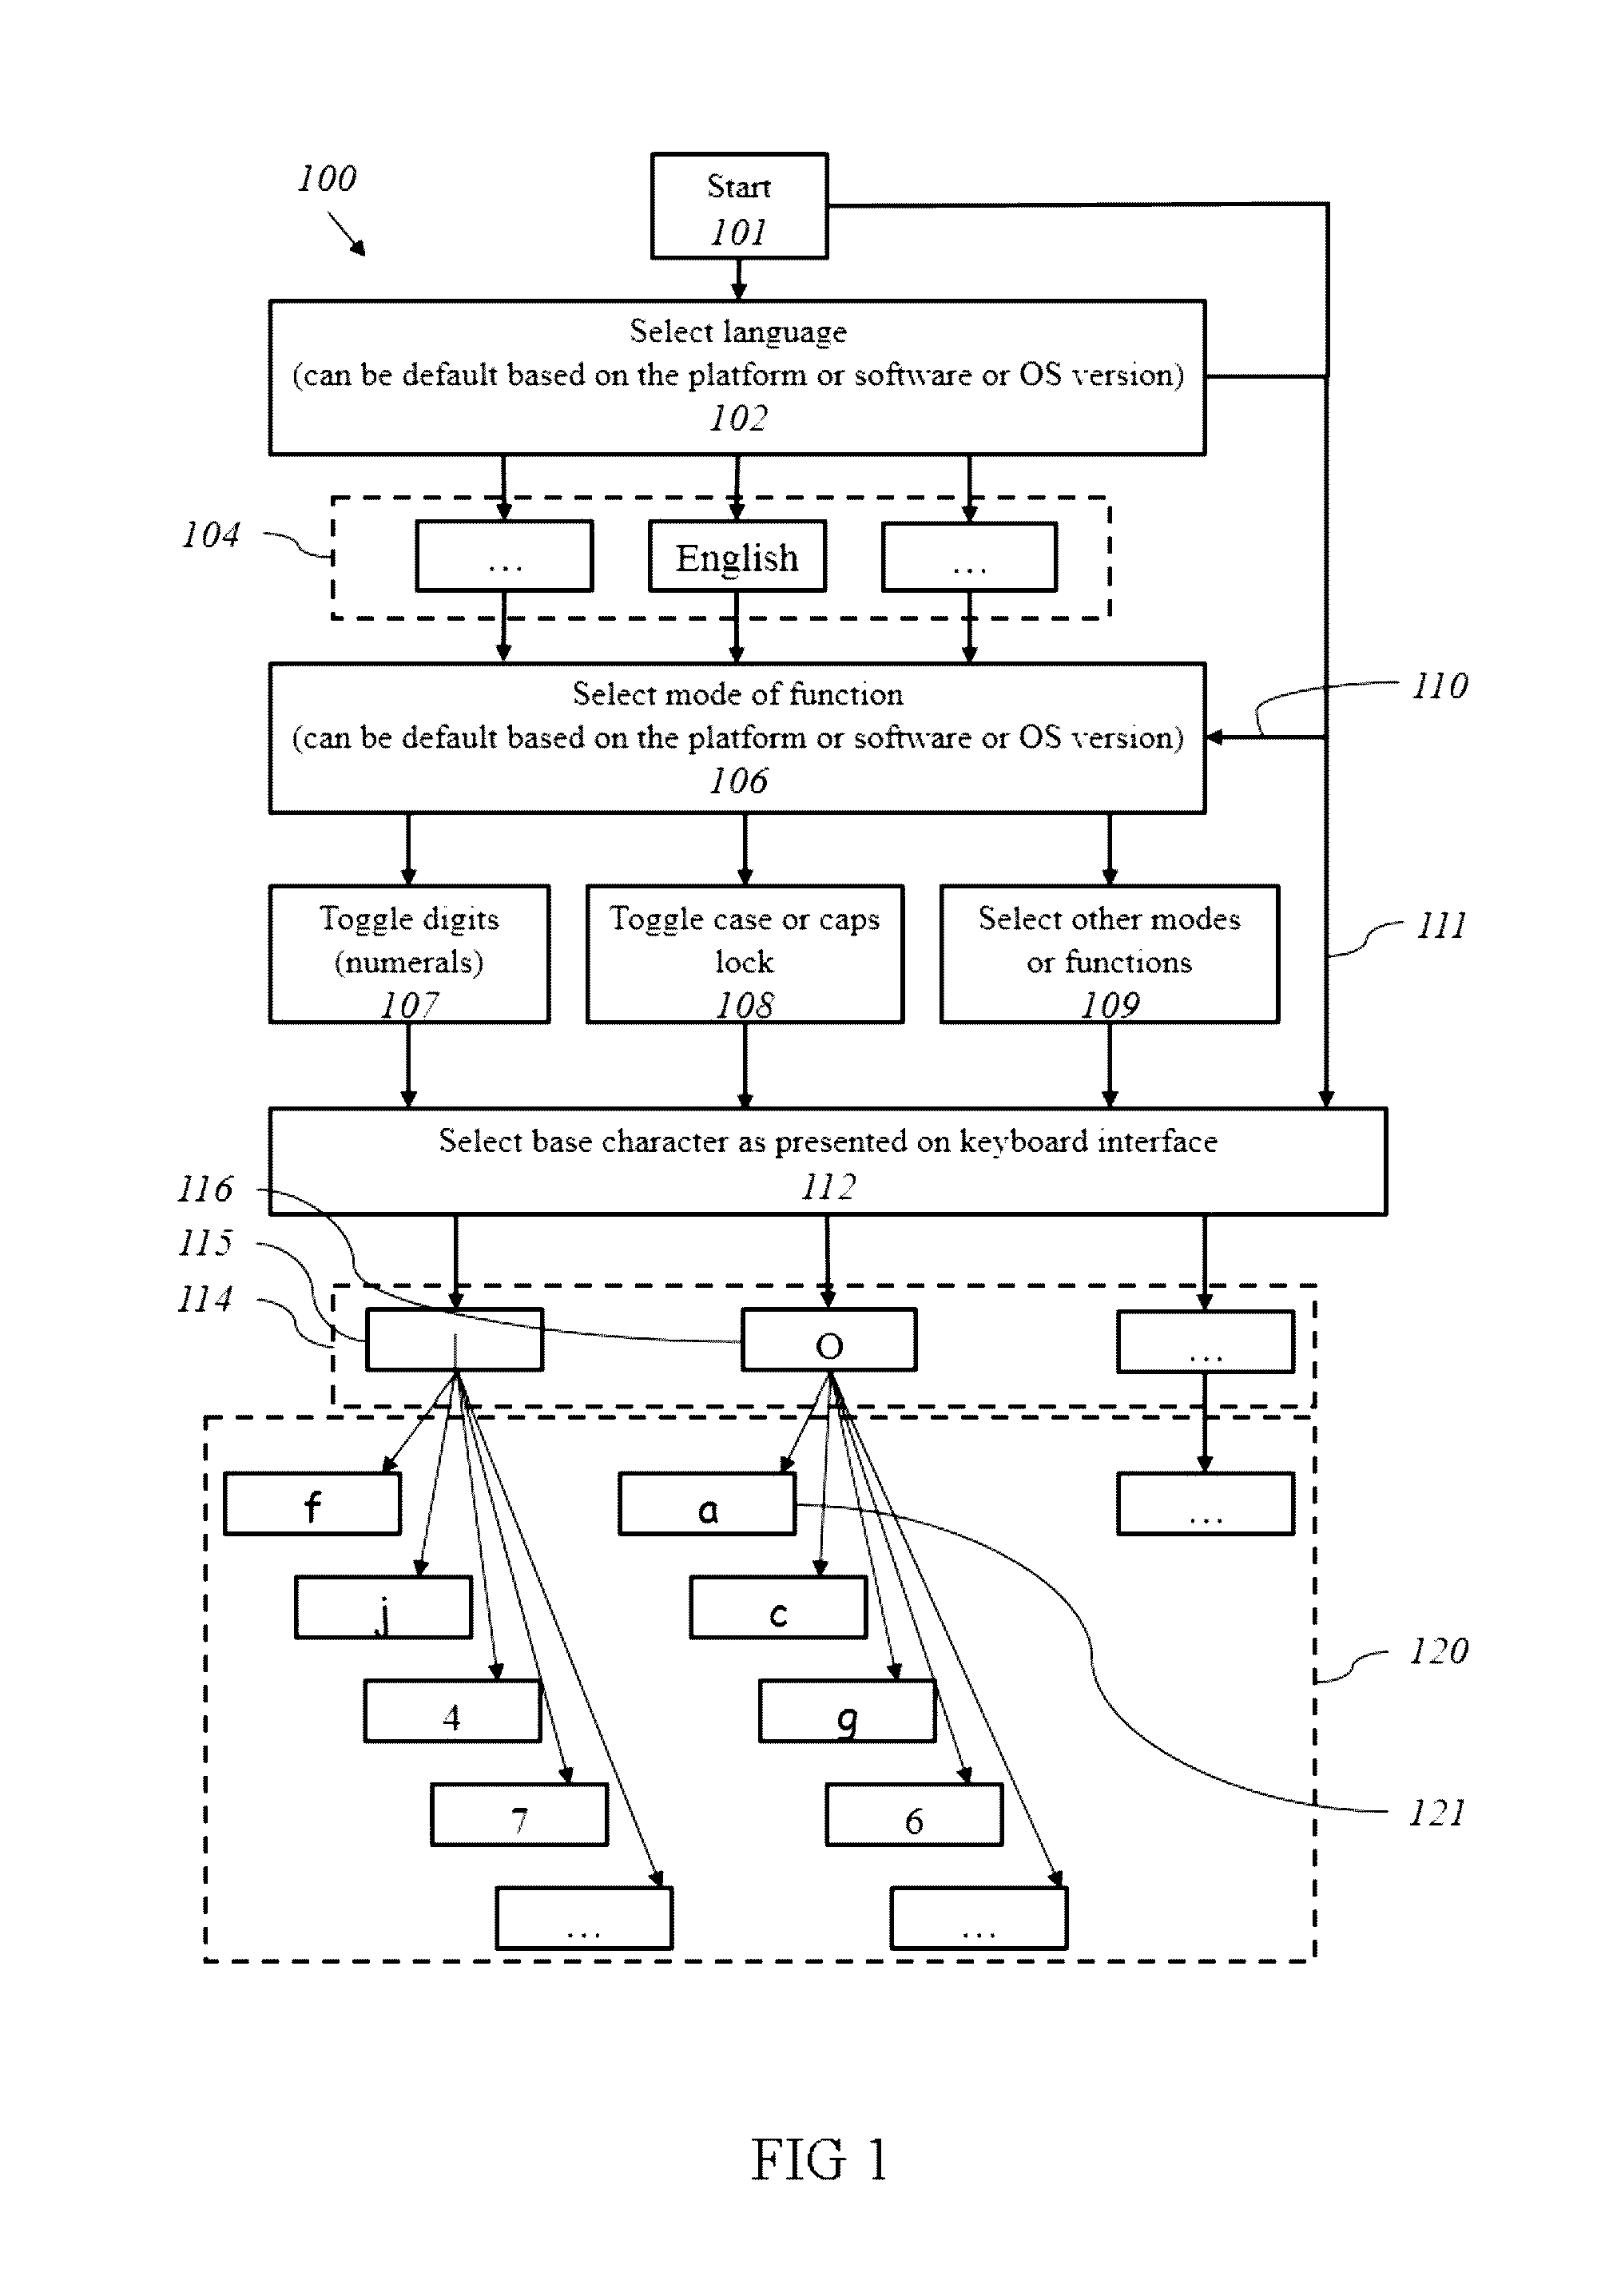 Method and system of data entry on a virtual interface